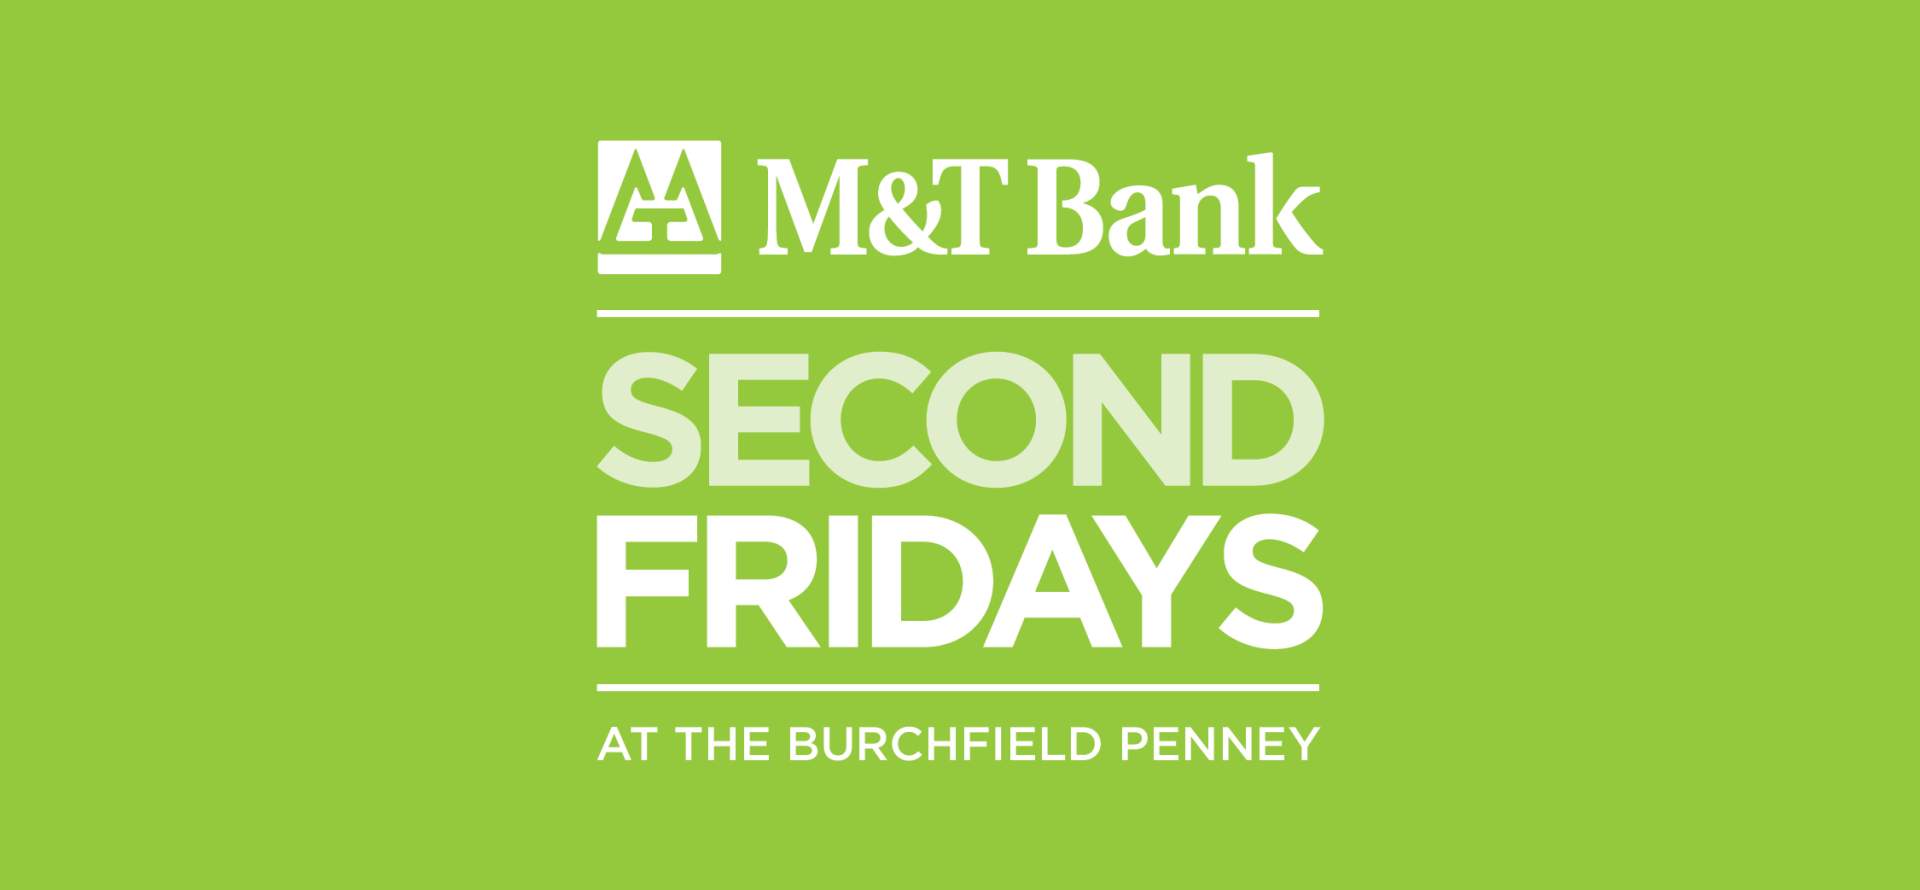 M&T SECOND FRIDAY